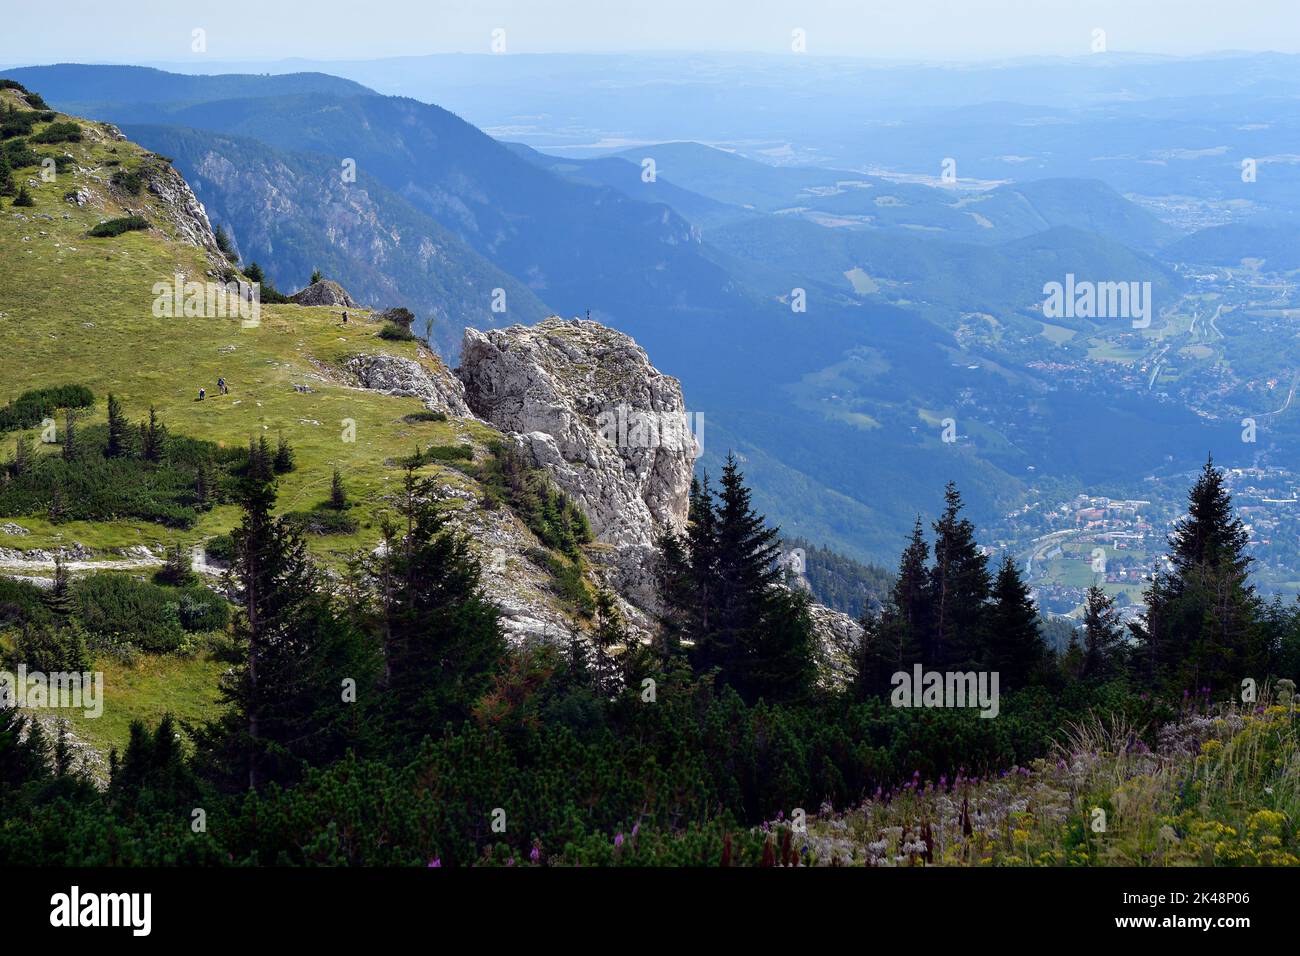 Austria, Rax mountain in Lower Austria with view over the so-called Vienna Basin Stock Photo